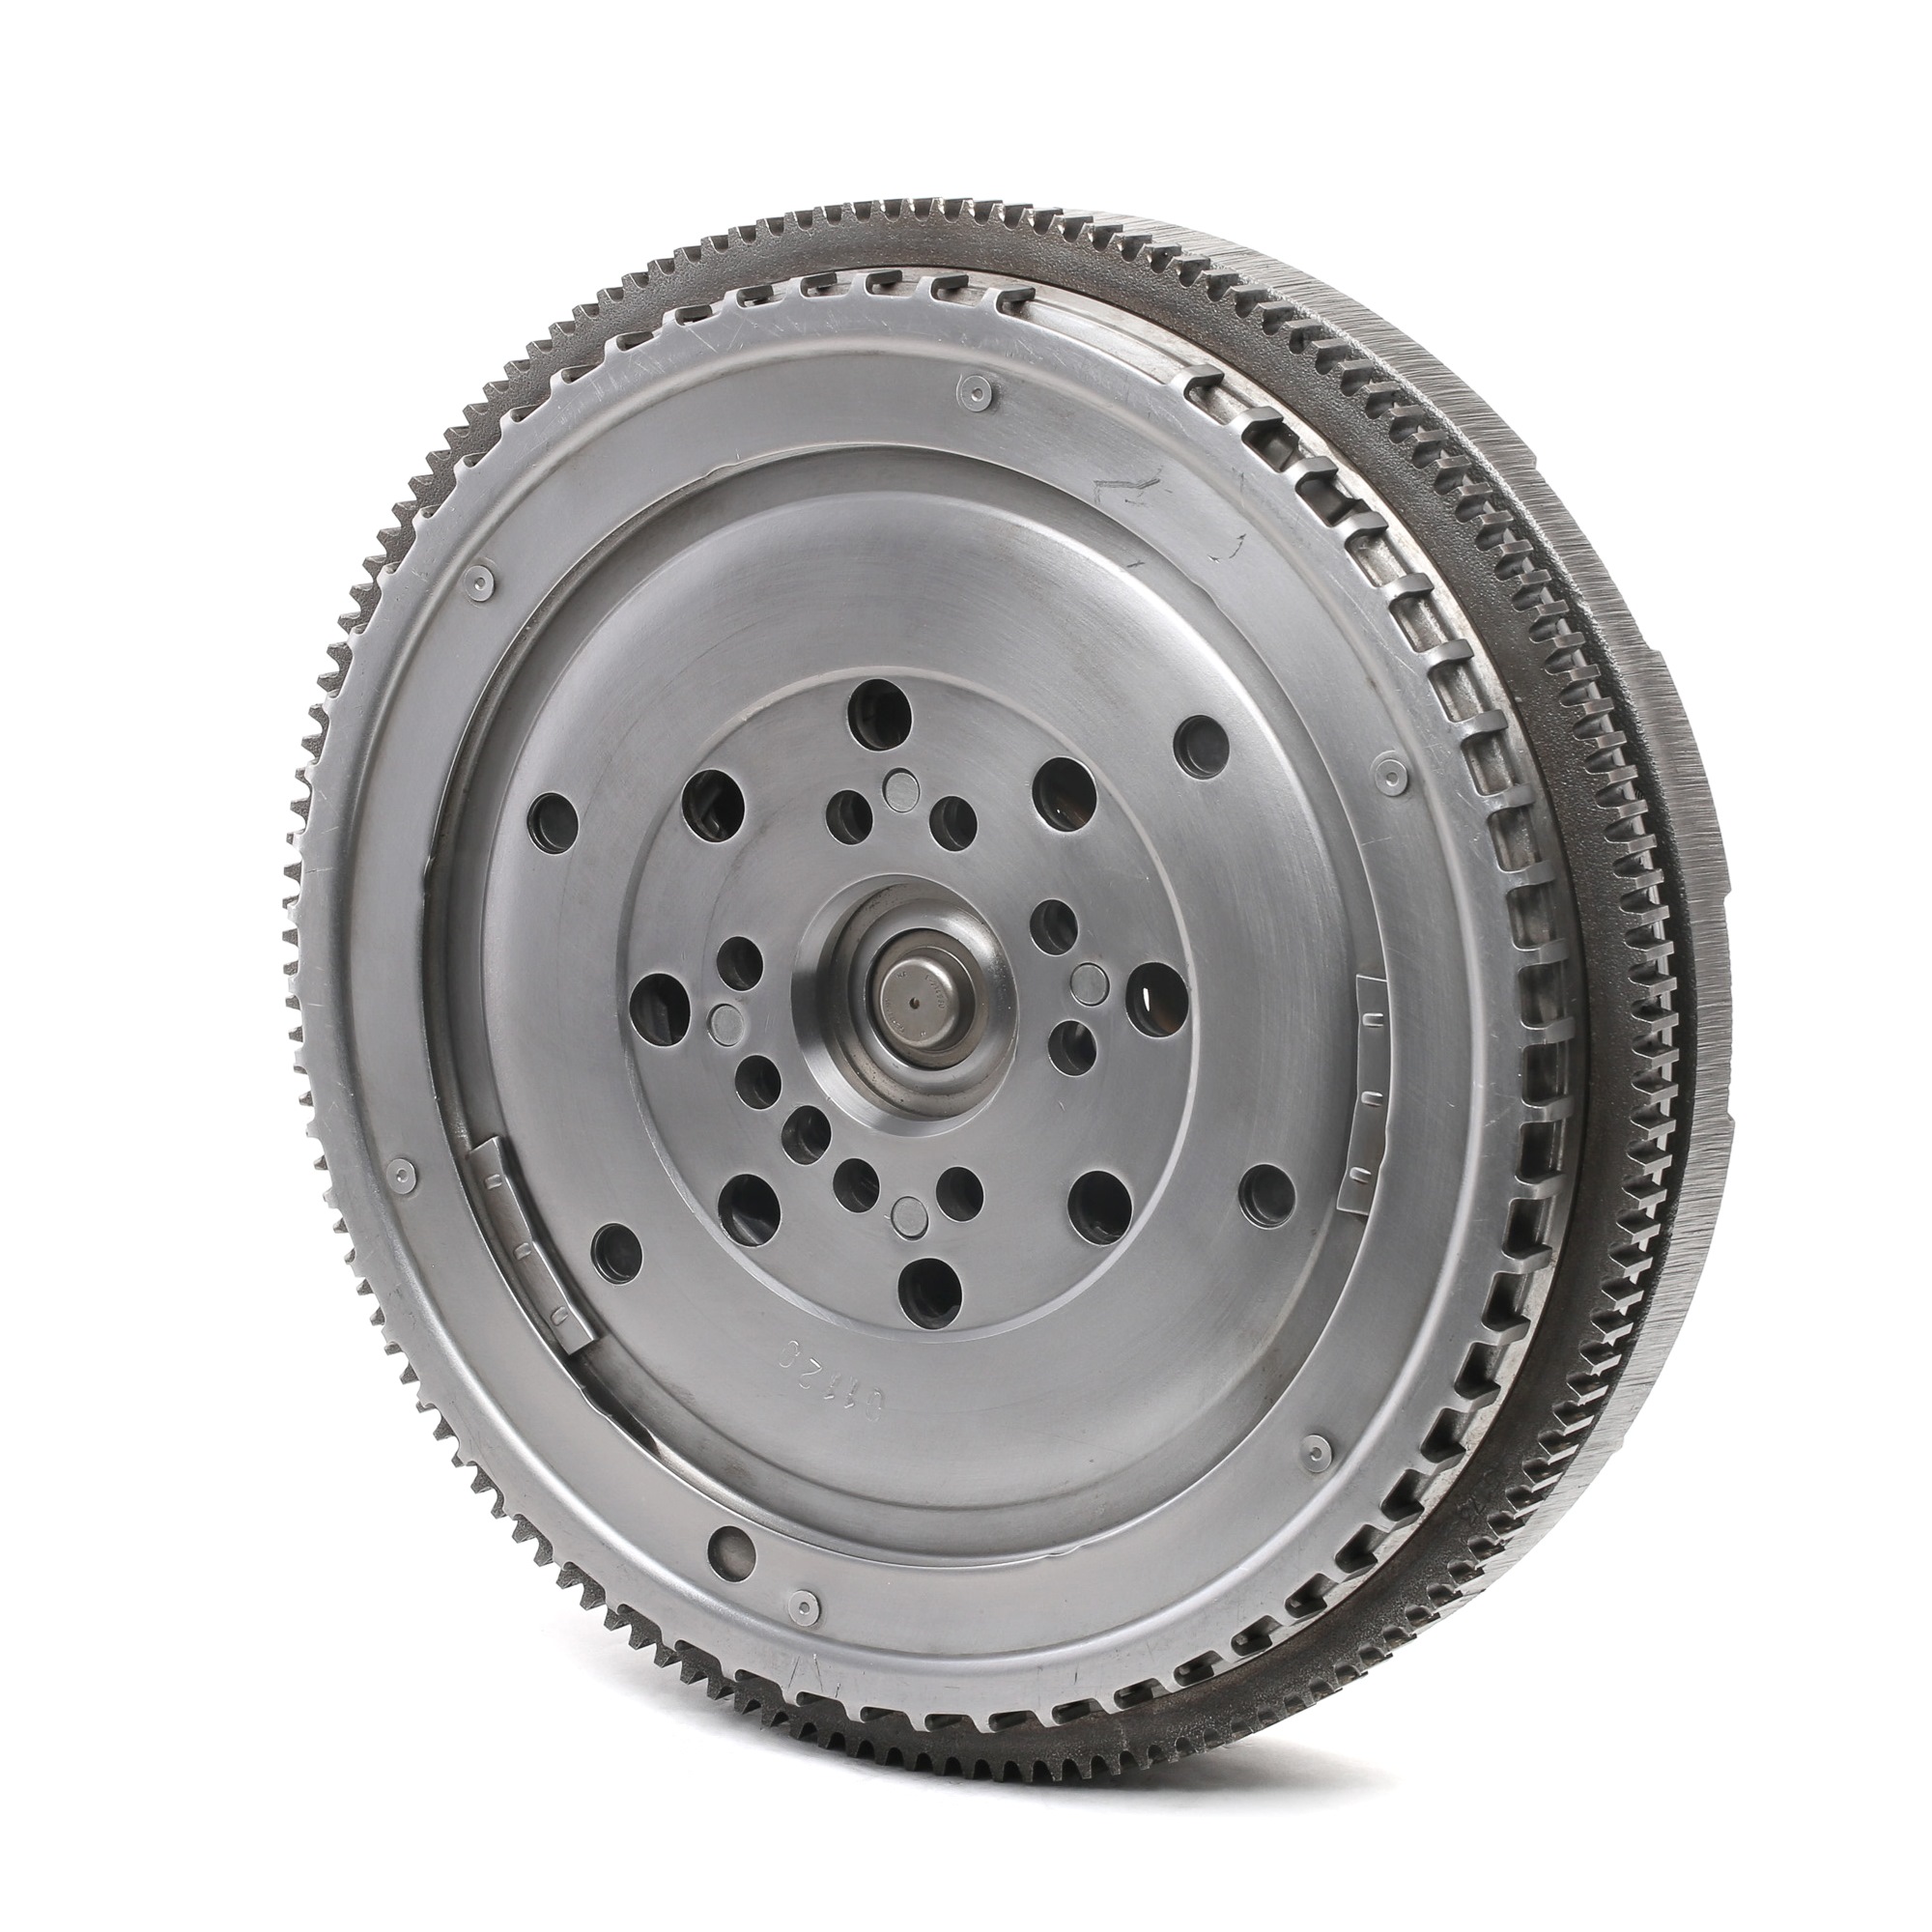 DMF RIDEX REMAN Dual-mass flywheel without friction control plate, with pilot bearing - 577F0278R